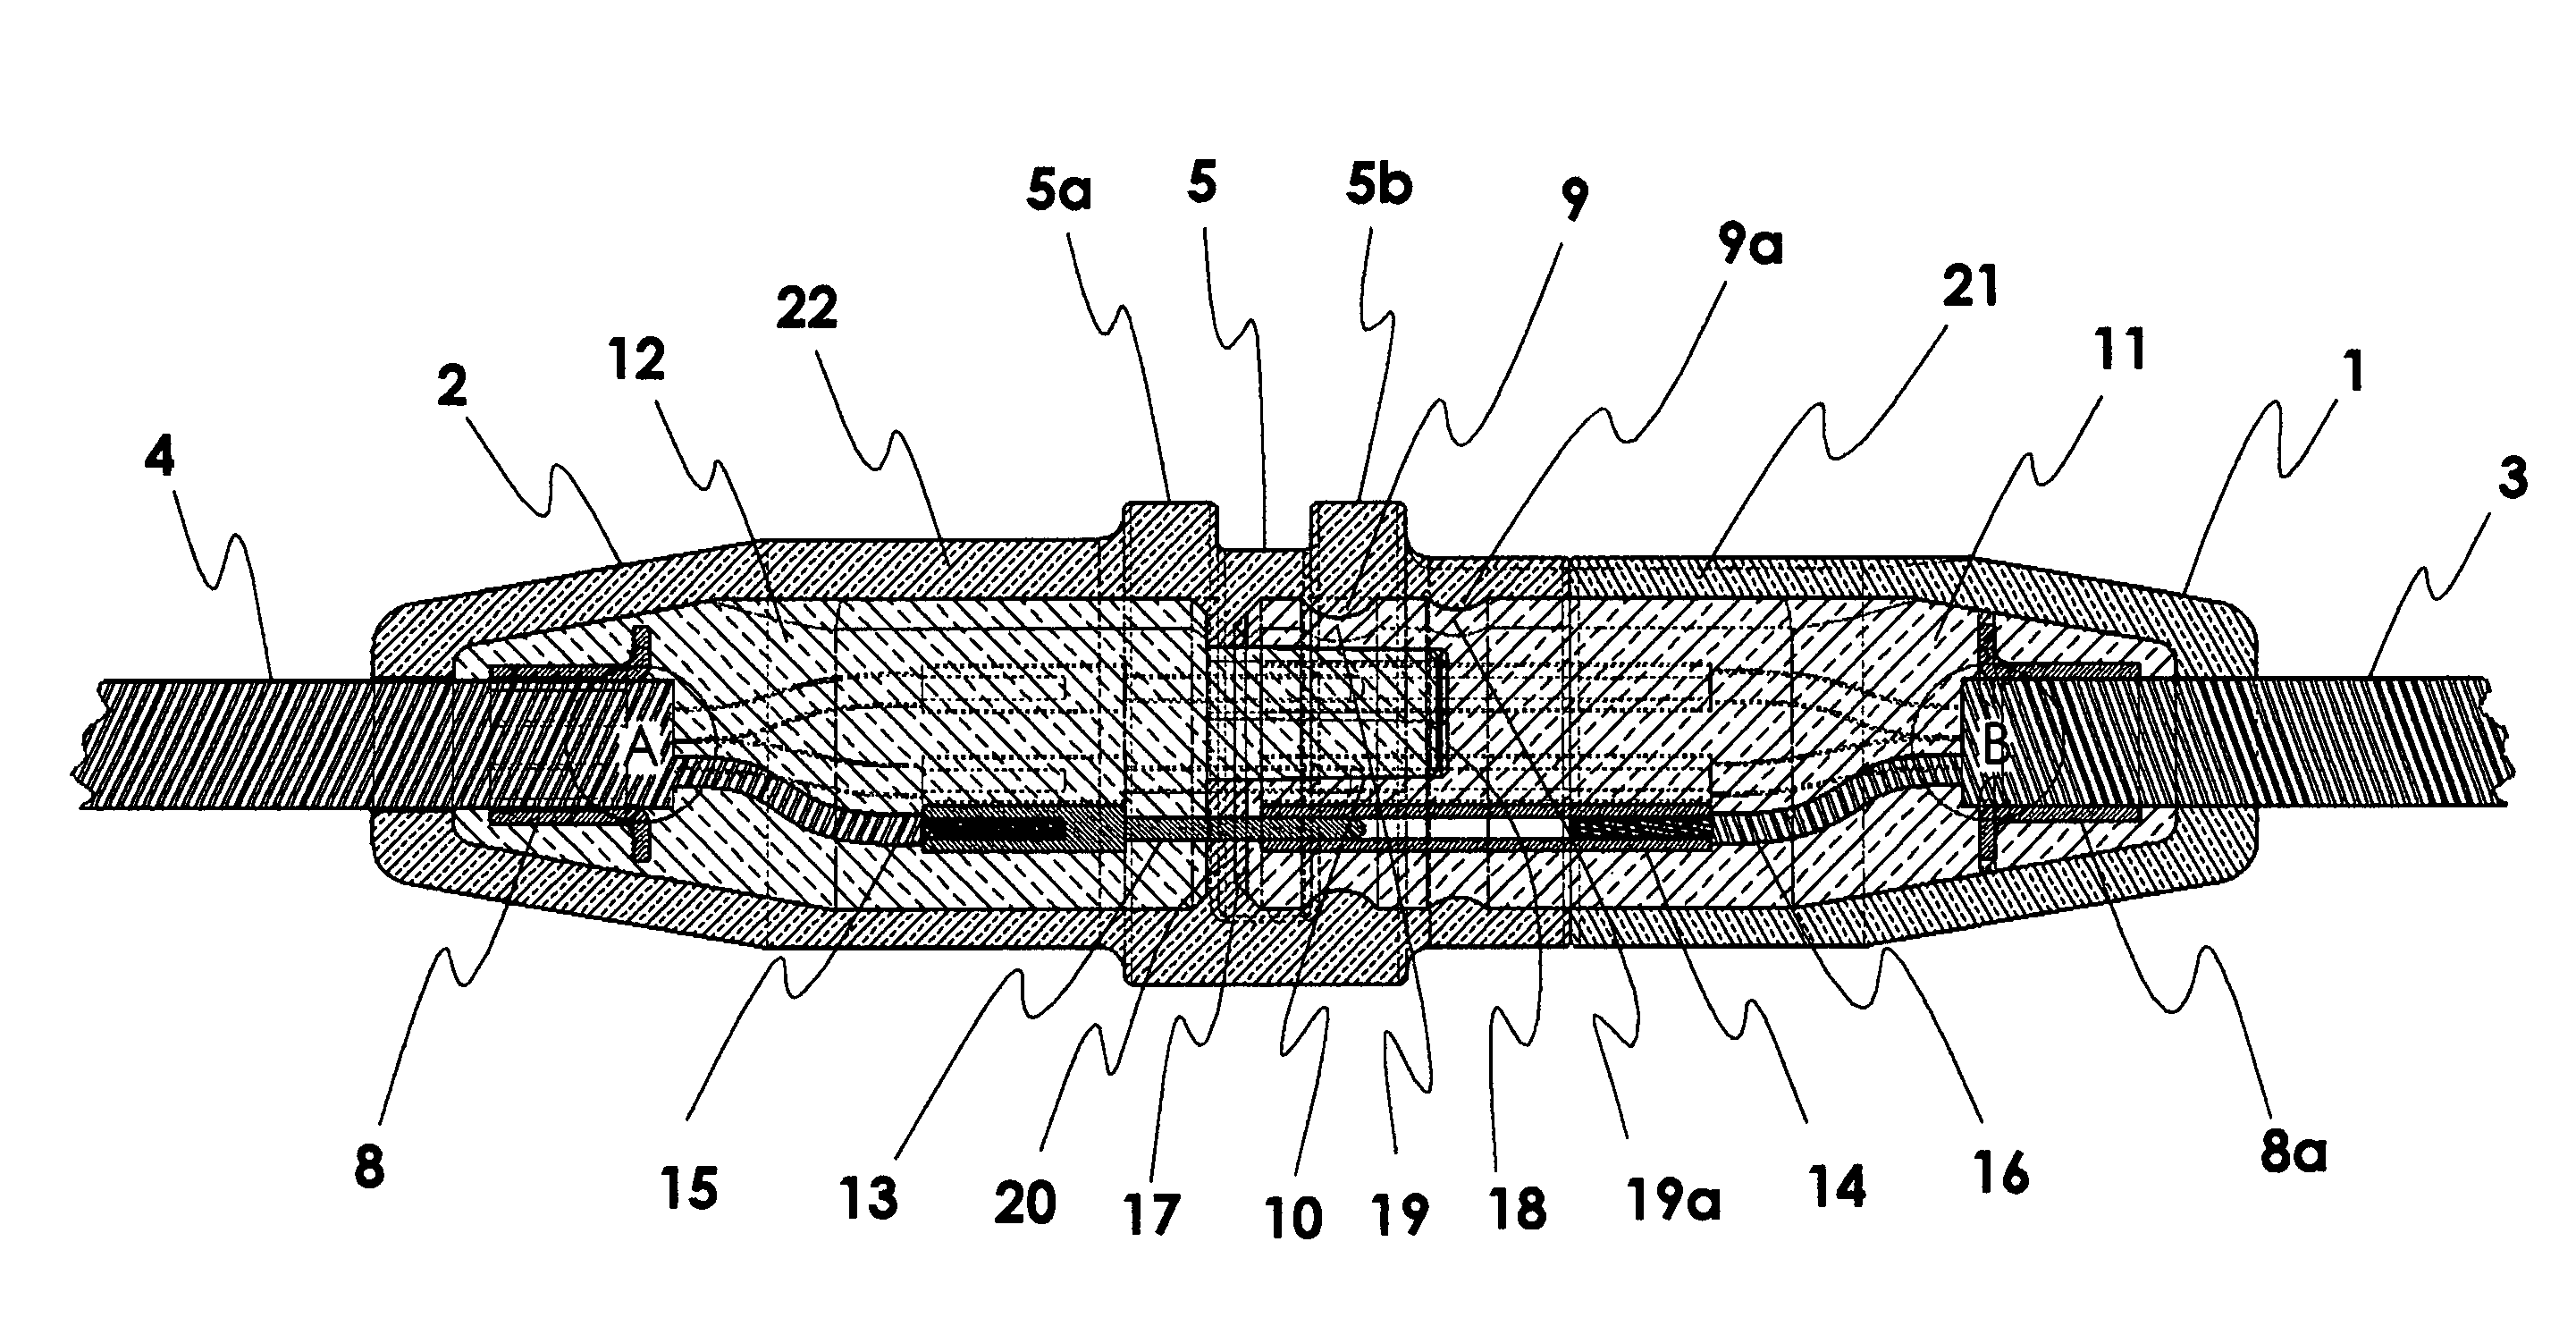 Highly moisture resistant coupler system for communications and electrical connections